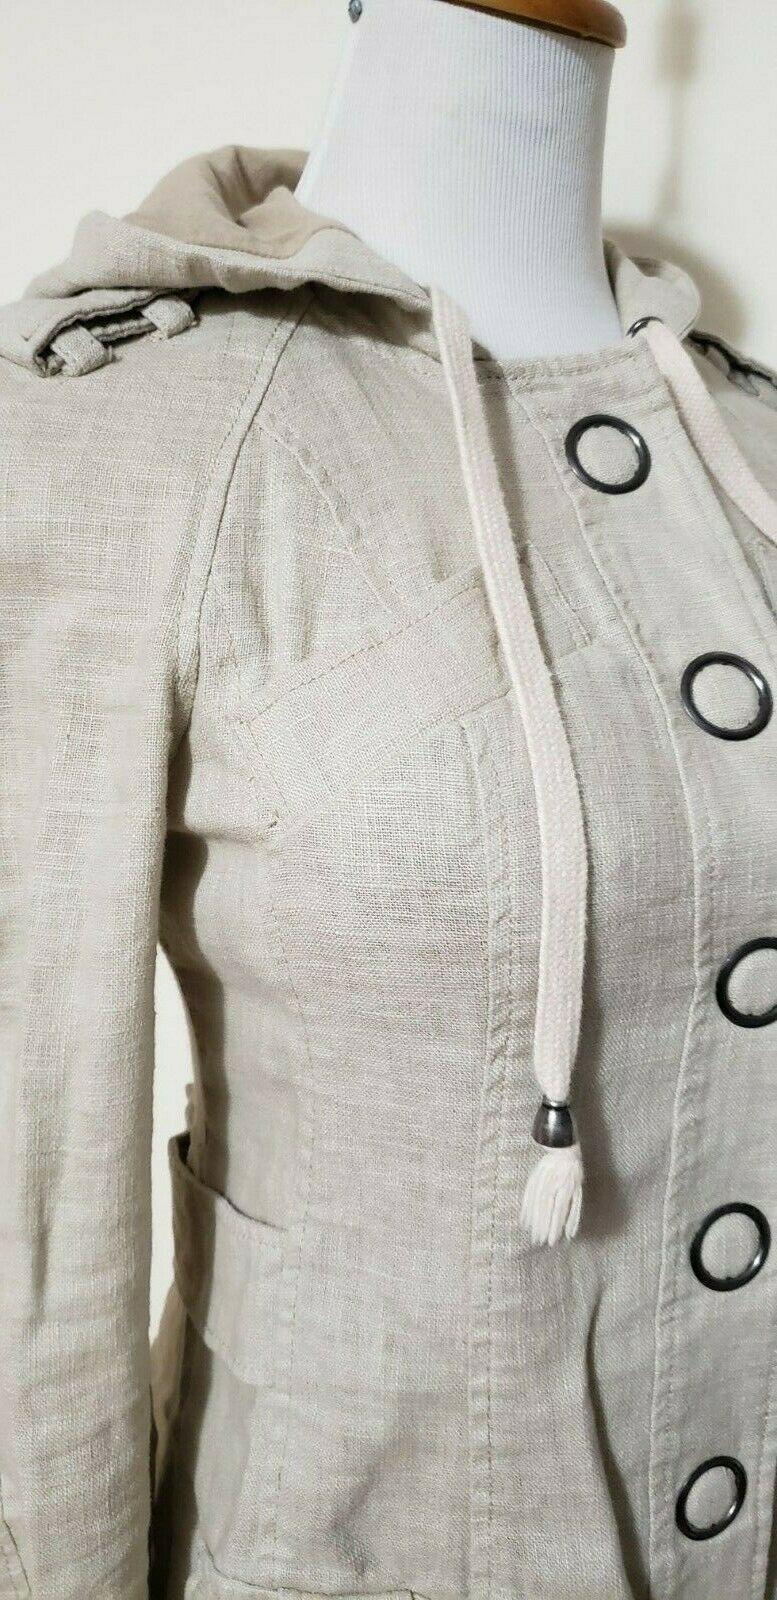 Free People Womens linen Jacket Dress With Hoodie Metal Snap Size 2 - SVNYFancy